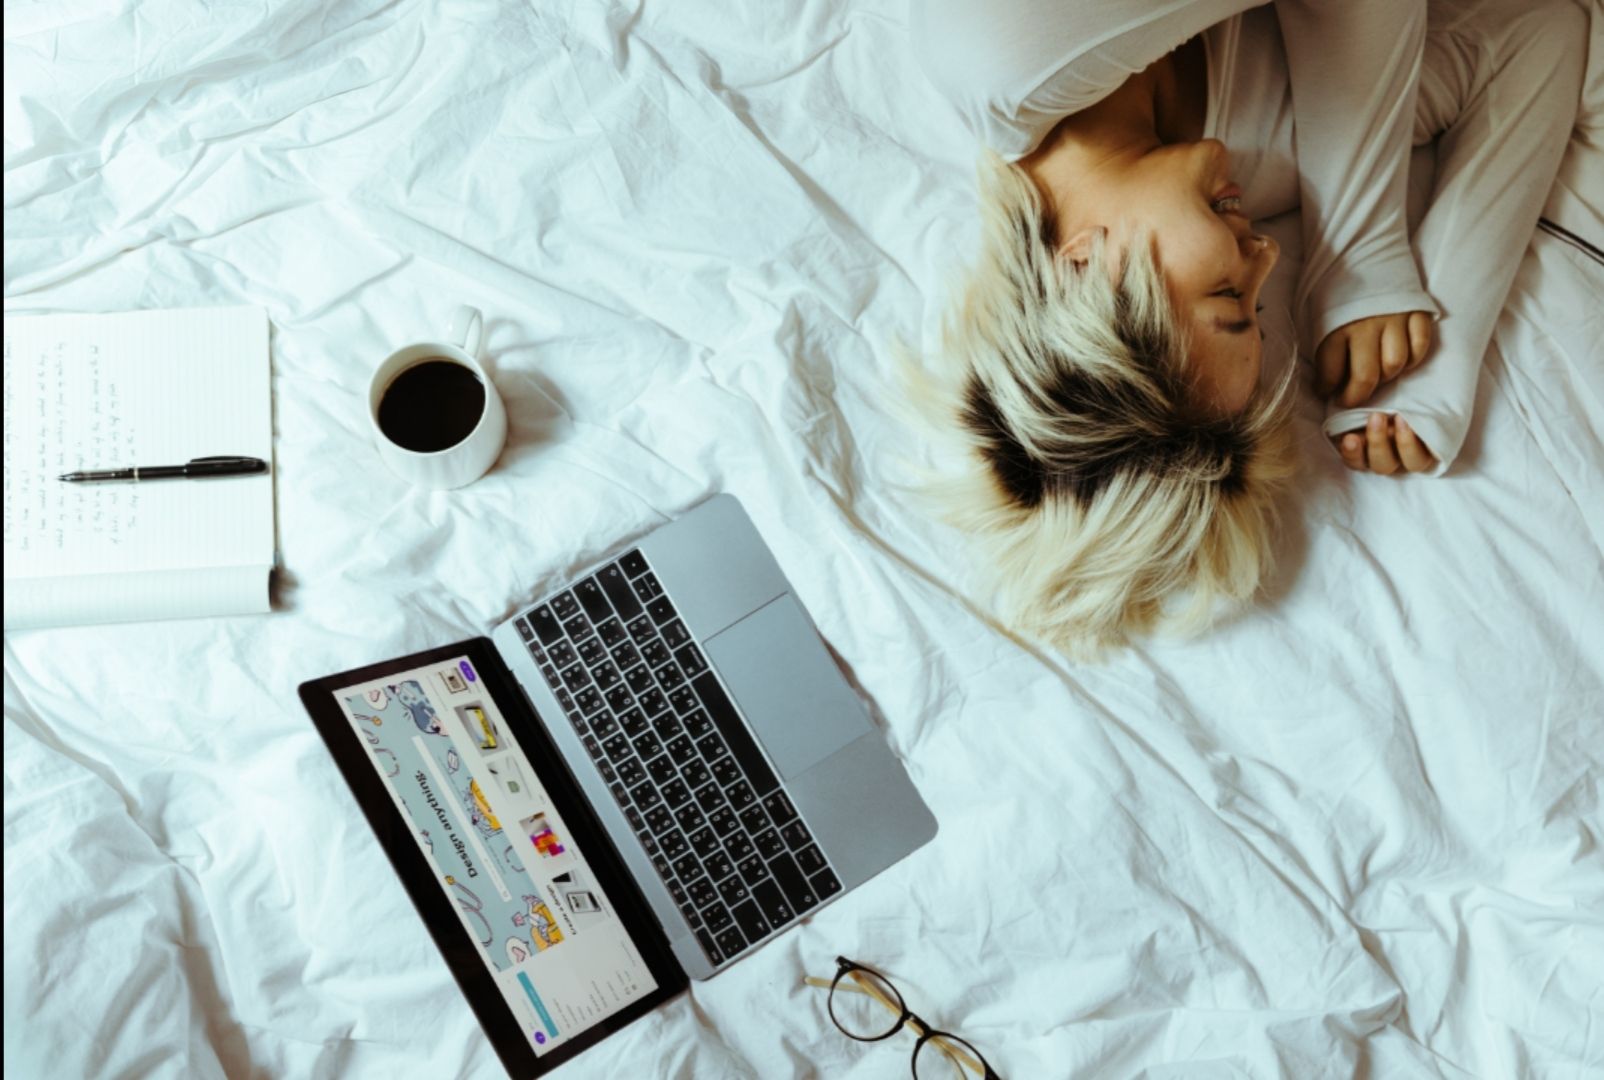 Photo by Ketut Subiyanto: https://www.pexels.com/photo/young-woman-using-laptop-in-bed-and-resting-4132337/